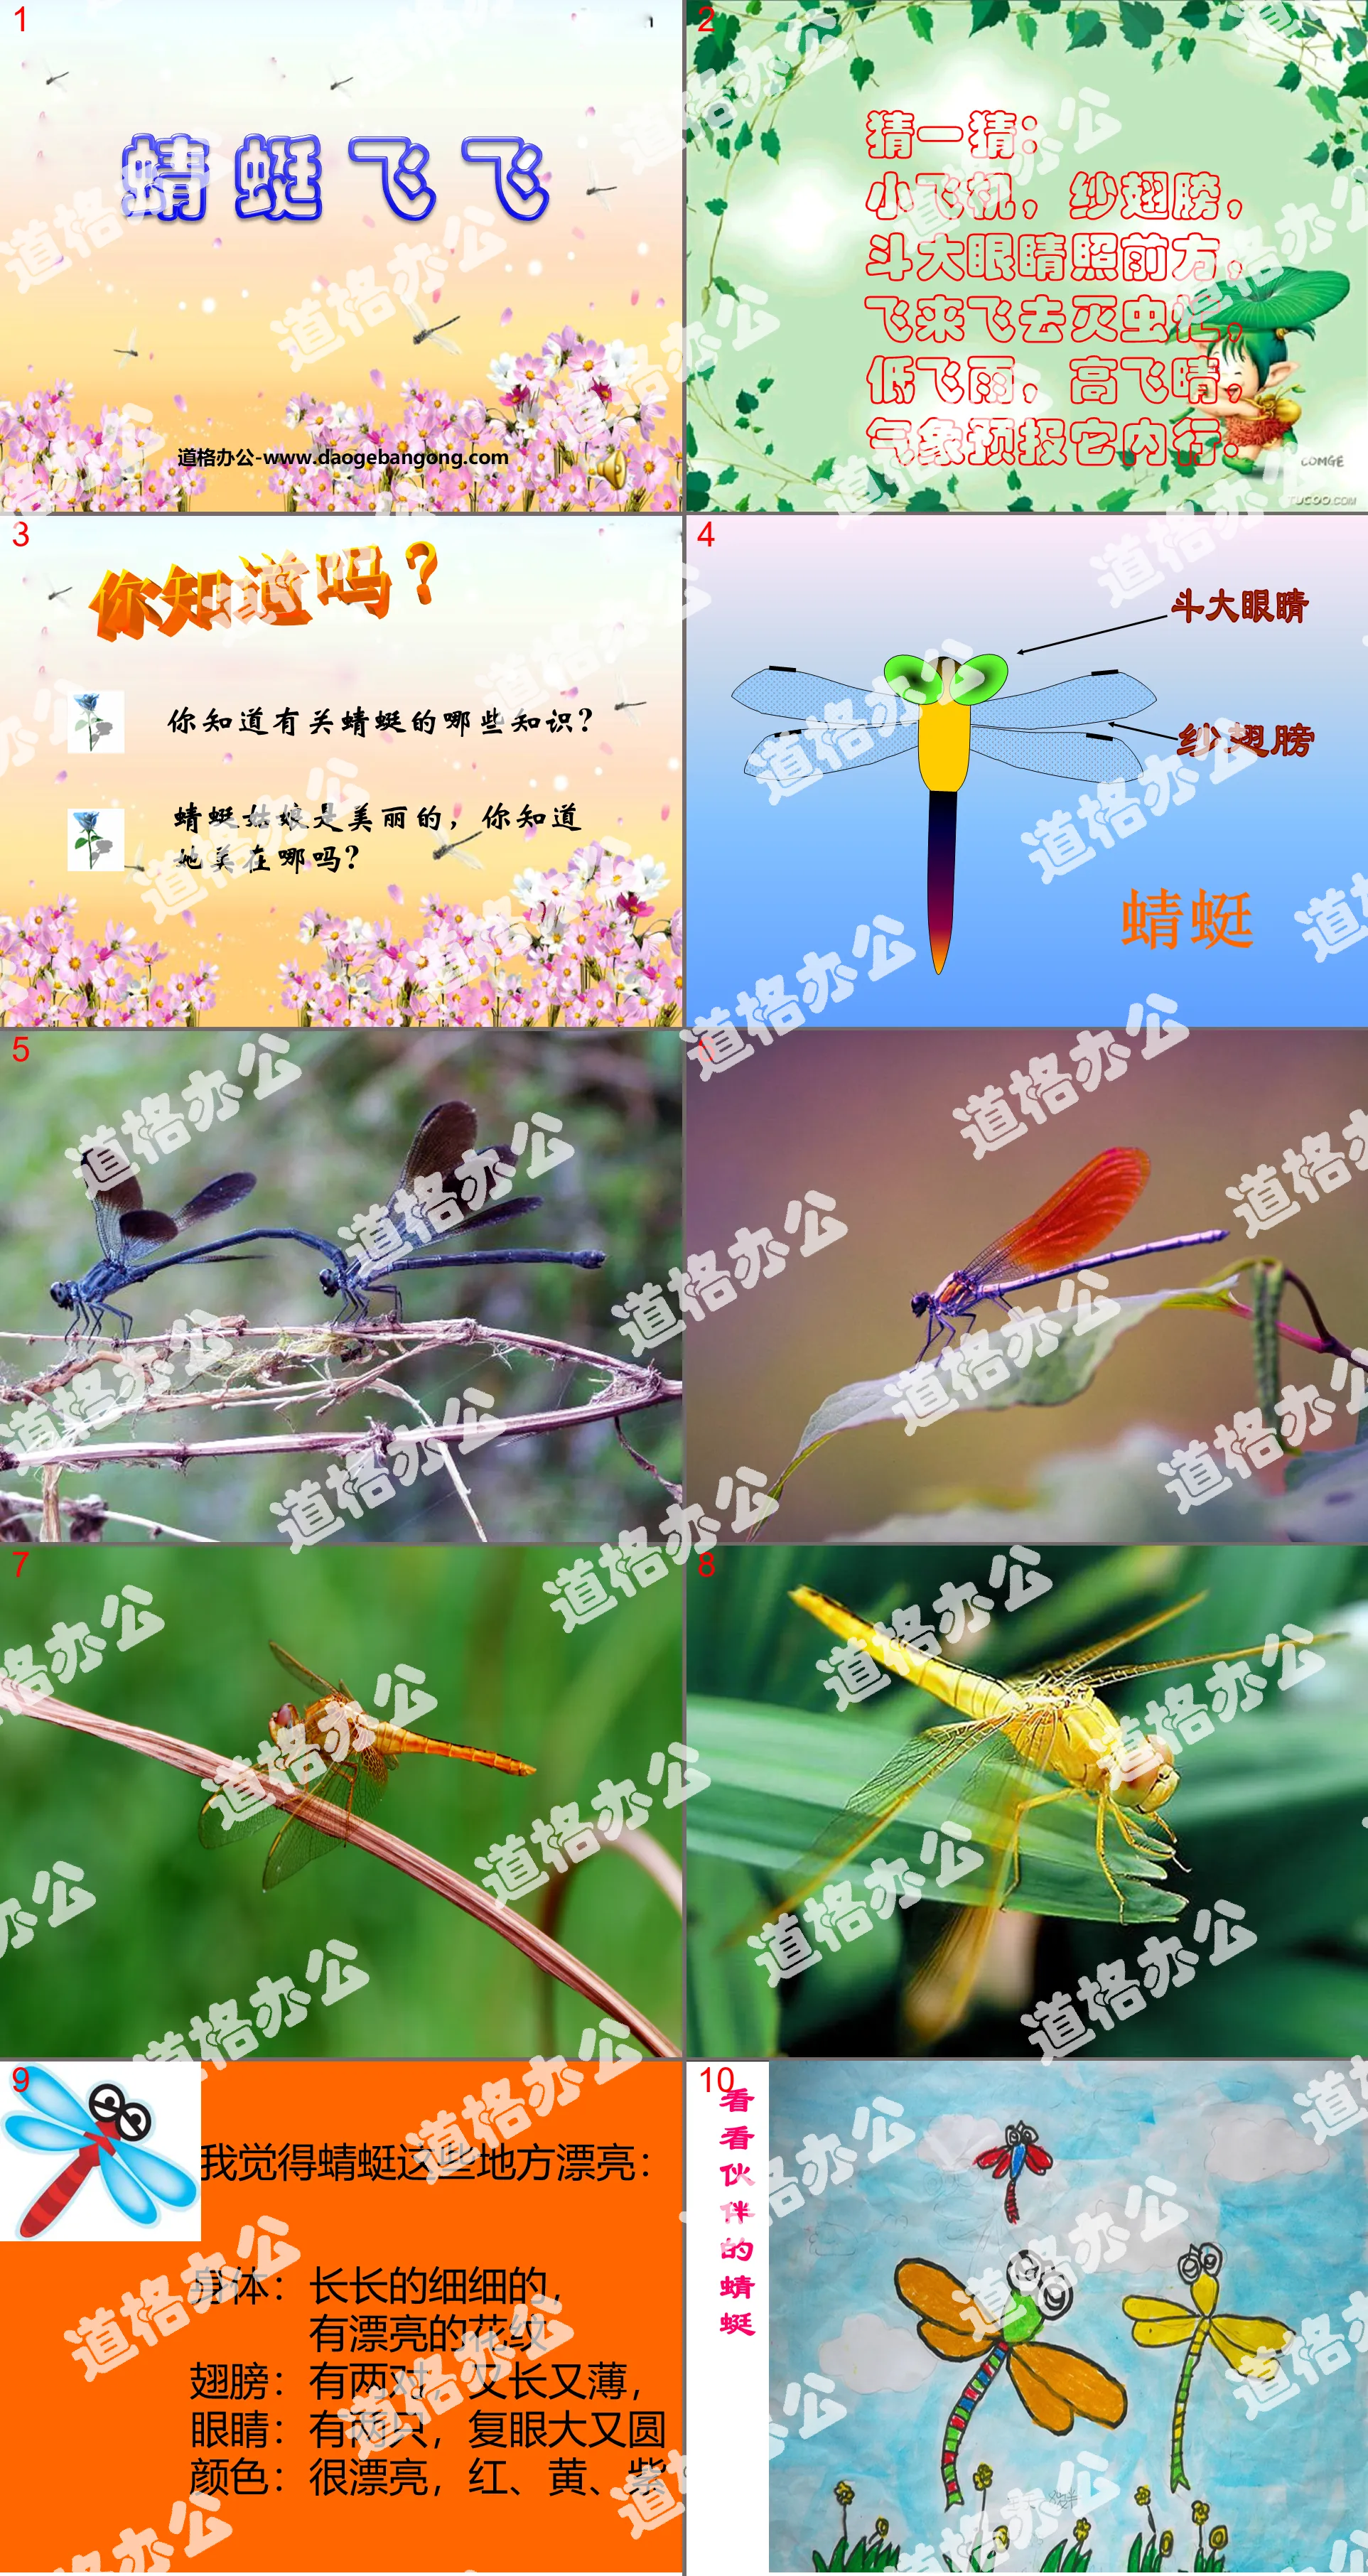 "Dragonfly Flying" PPT courseware 2